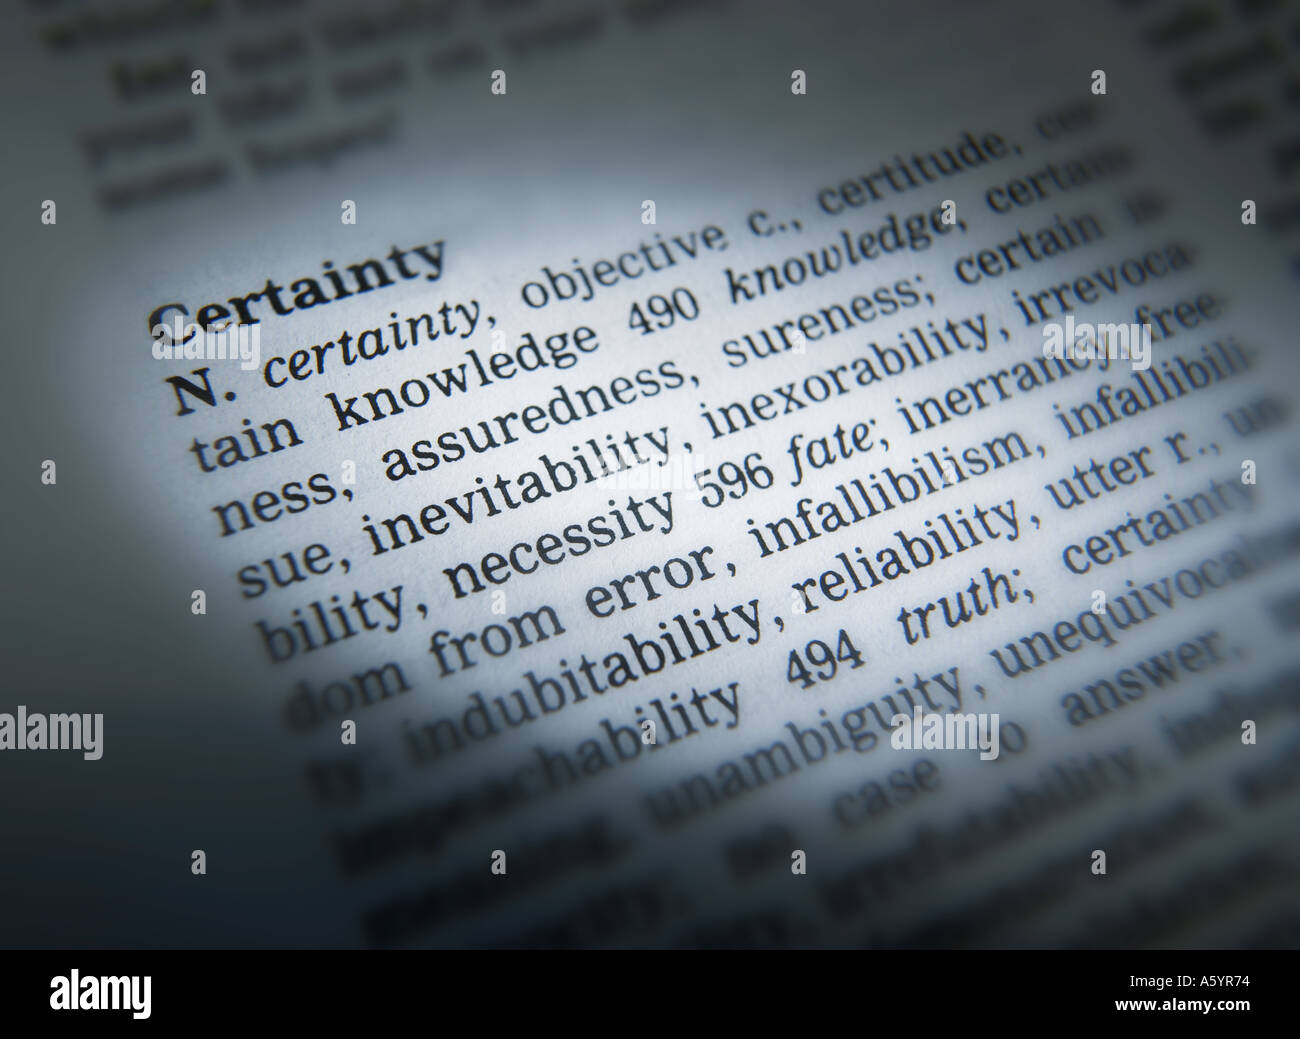 THESAURUS PAGE SHOWING DEFINITION OF WORD CERTAINTY Stock Photo